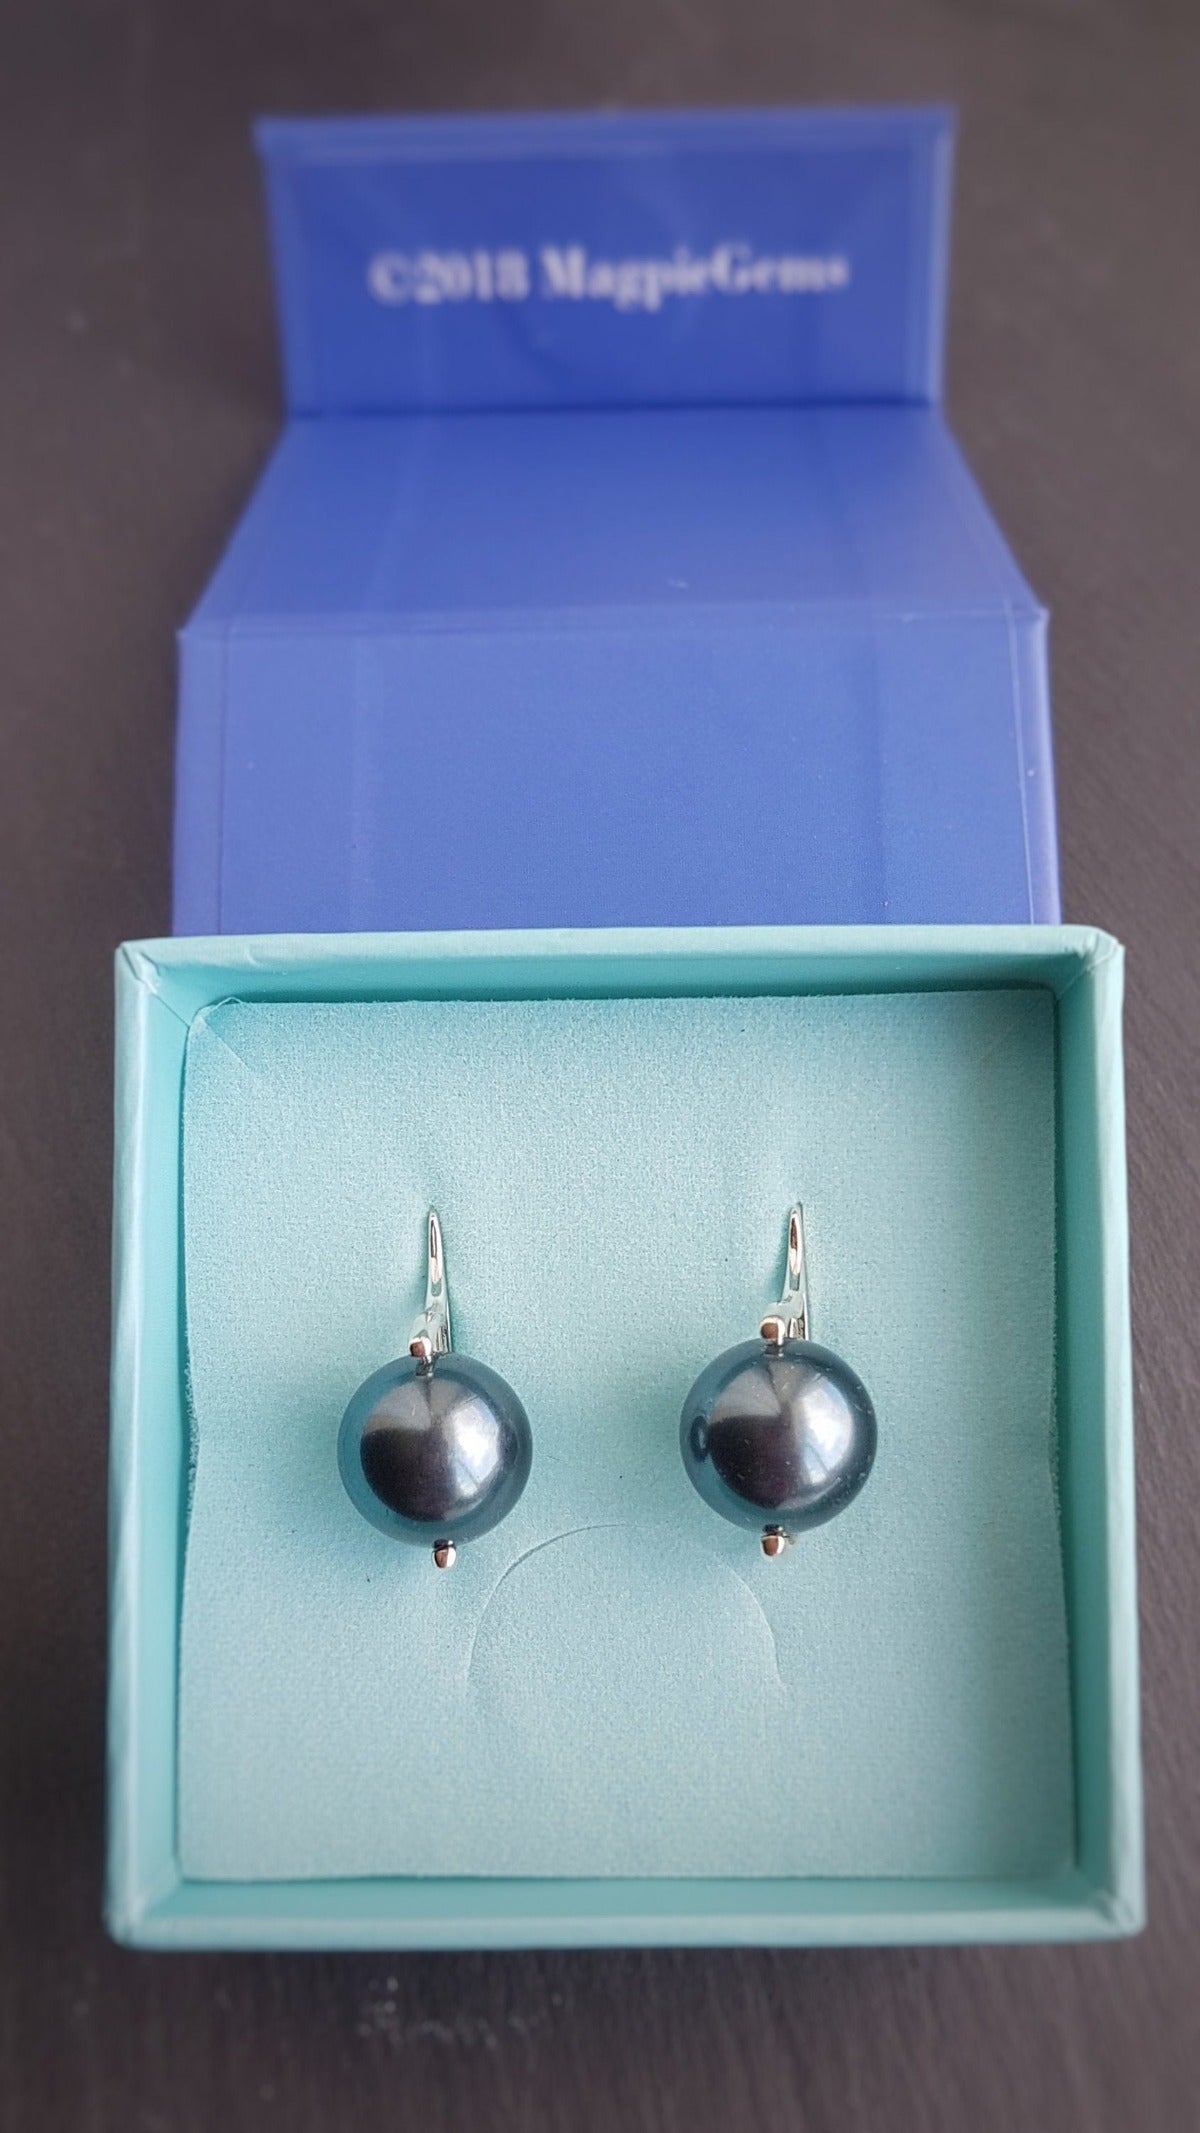 Round Crystal Pearl Luster Earrings in Tahitian color, drop style, leverback fitting, gift boxed, by Magpie Gems Ireland